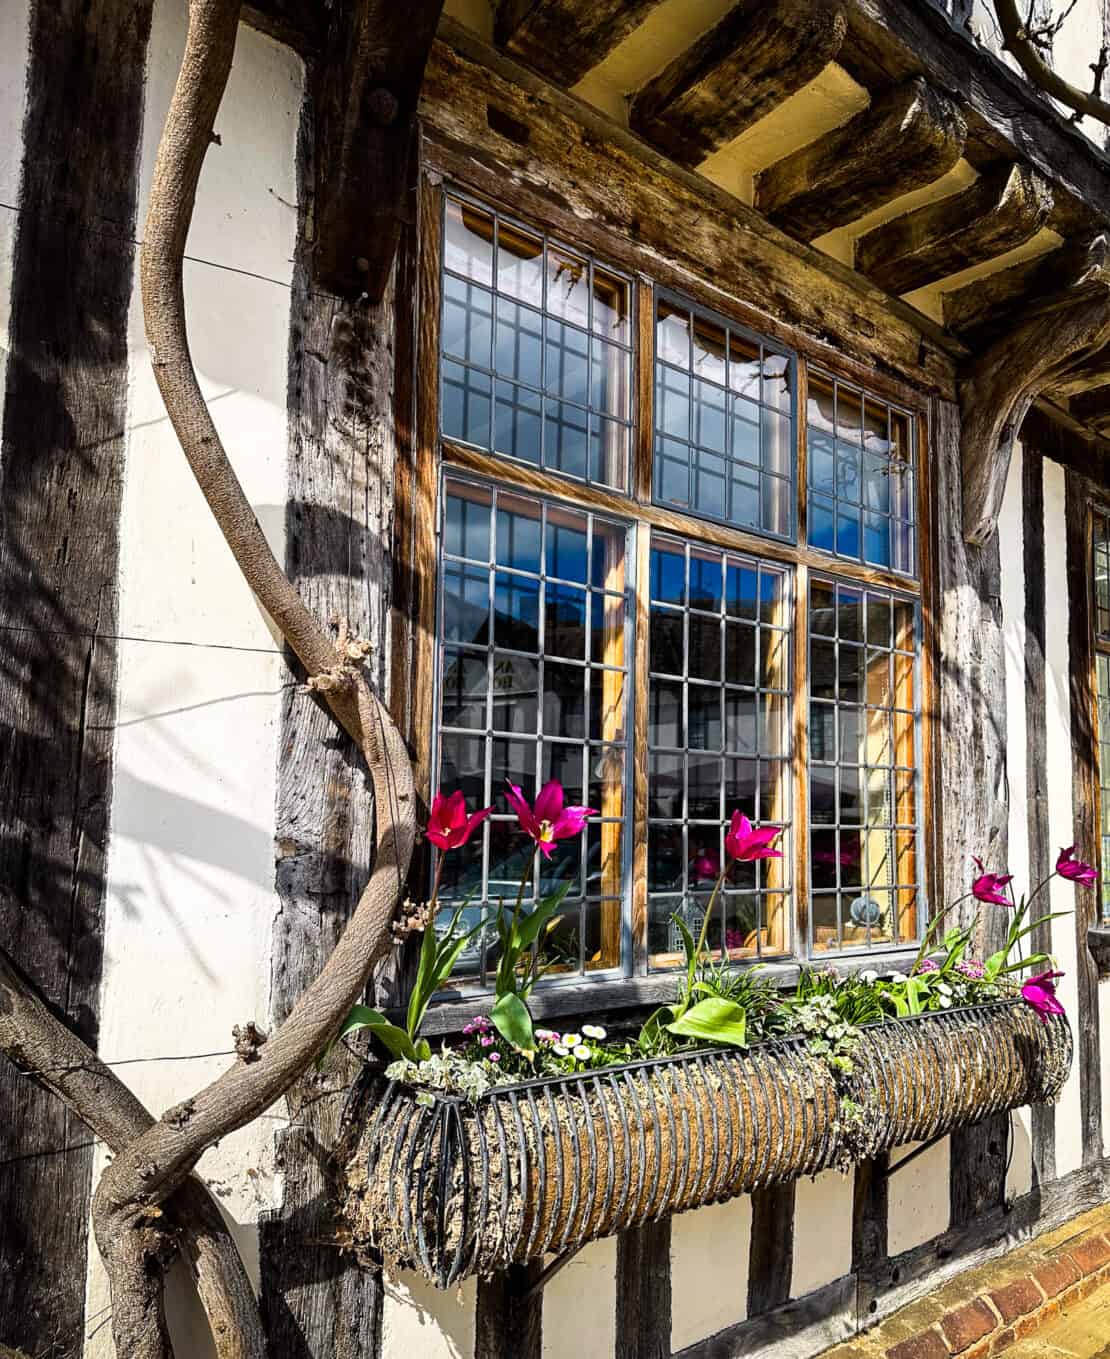 Old fashioned window and flower box in Lavenham England